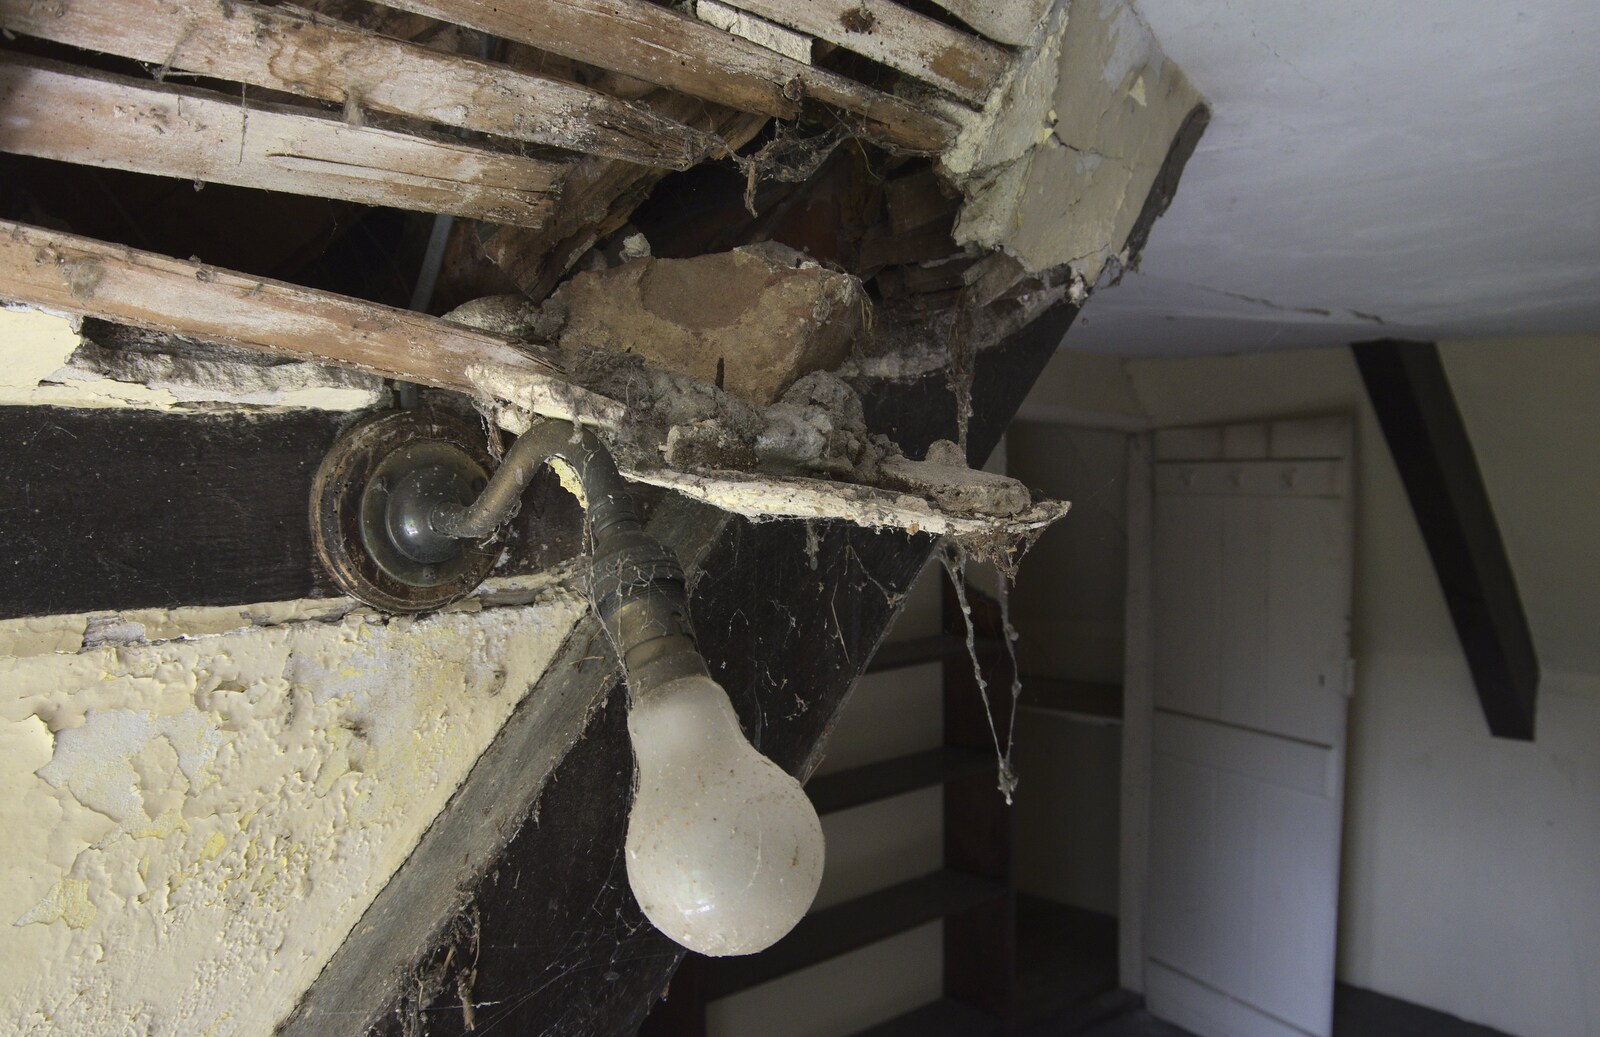 Ceiling decay around an original light fitting from A 1940s Timewarp, Site 4, Bungay Airfield, Flixton, Suffolk - 9th June 2022